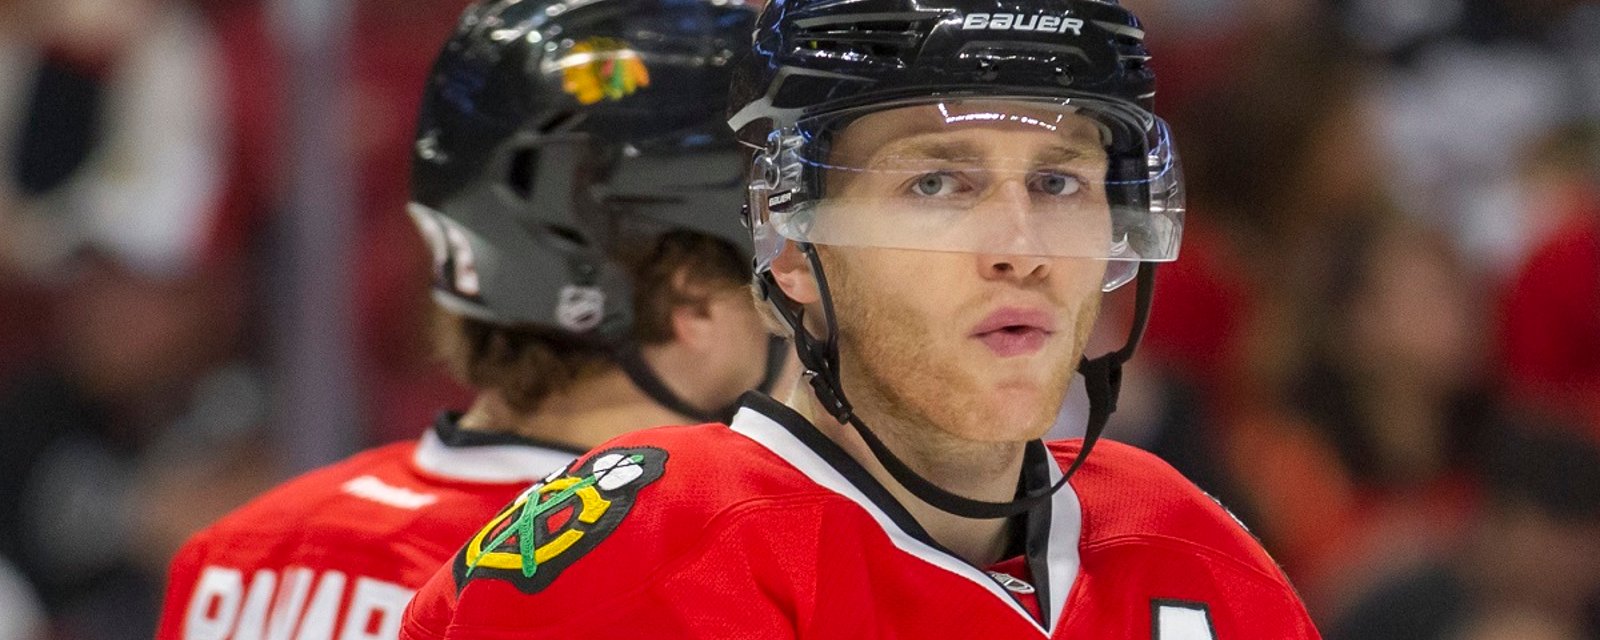 Three NHL players make the list of the “most punchable” athletes in sport.